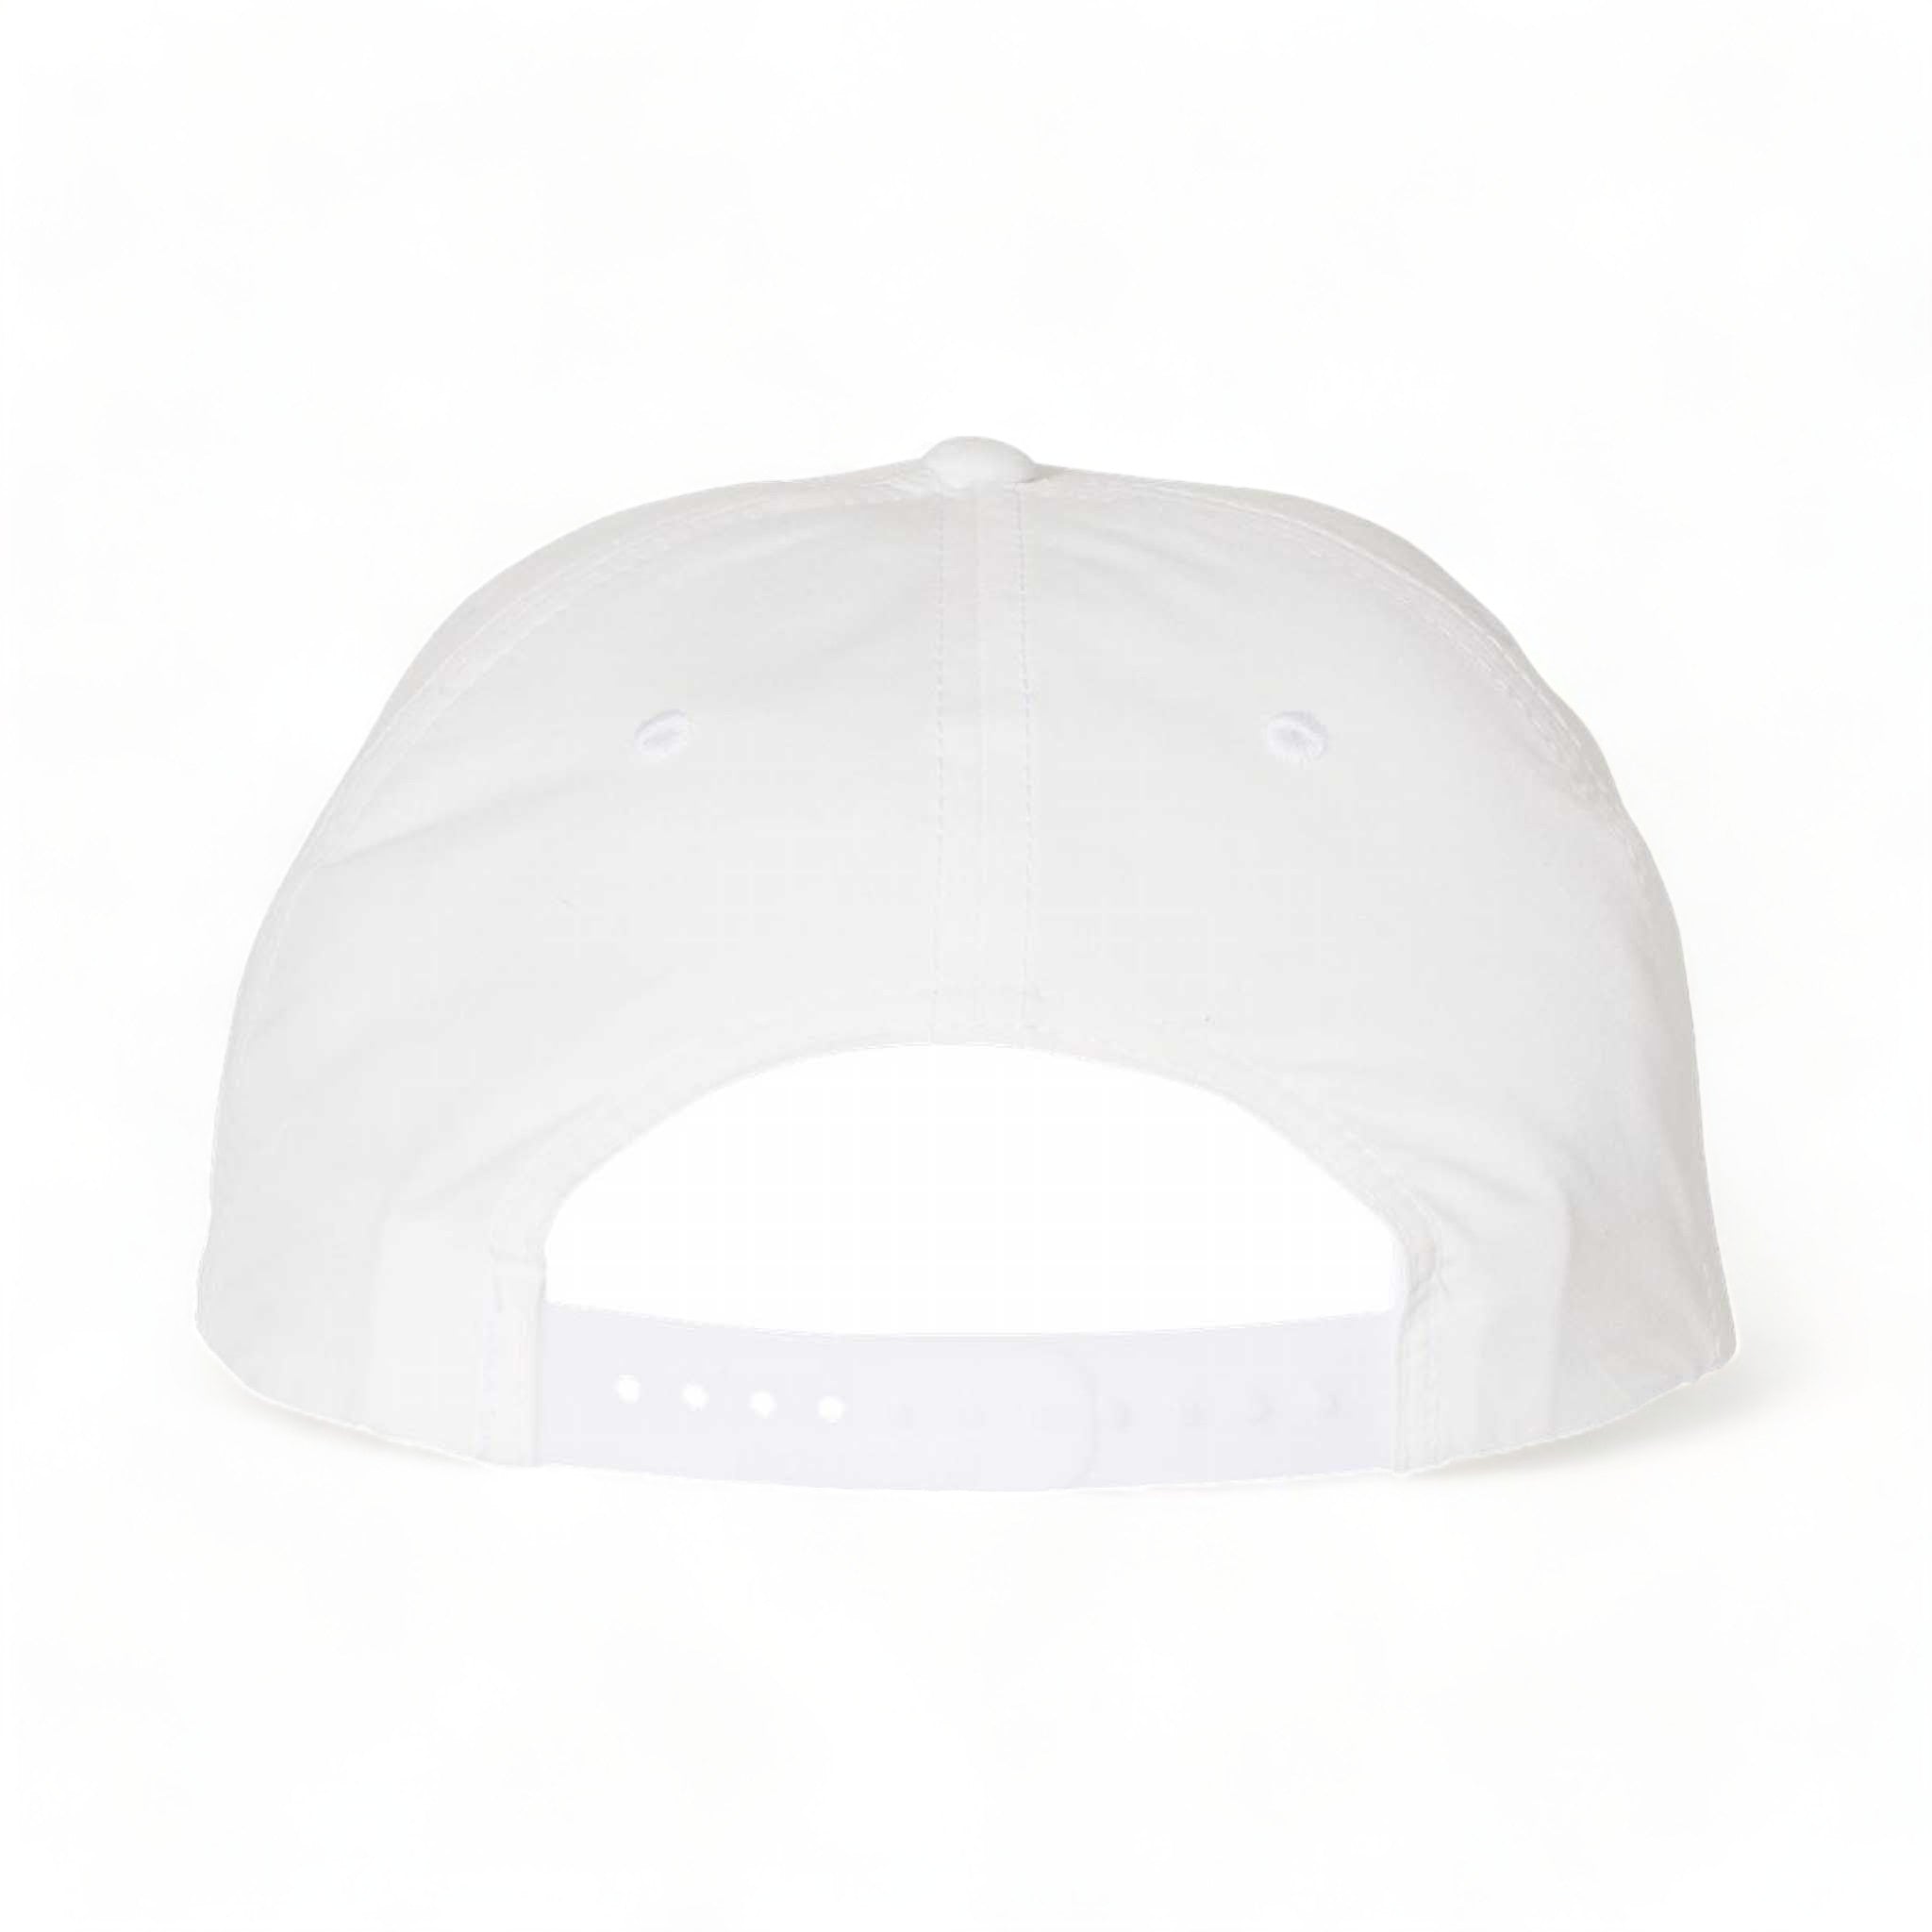 Back view of Richardson 256 custom hat in white and black